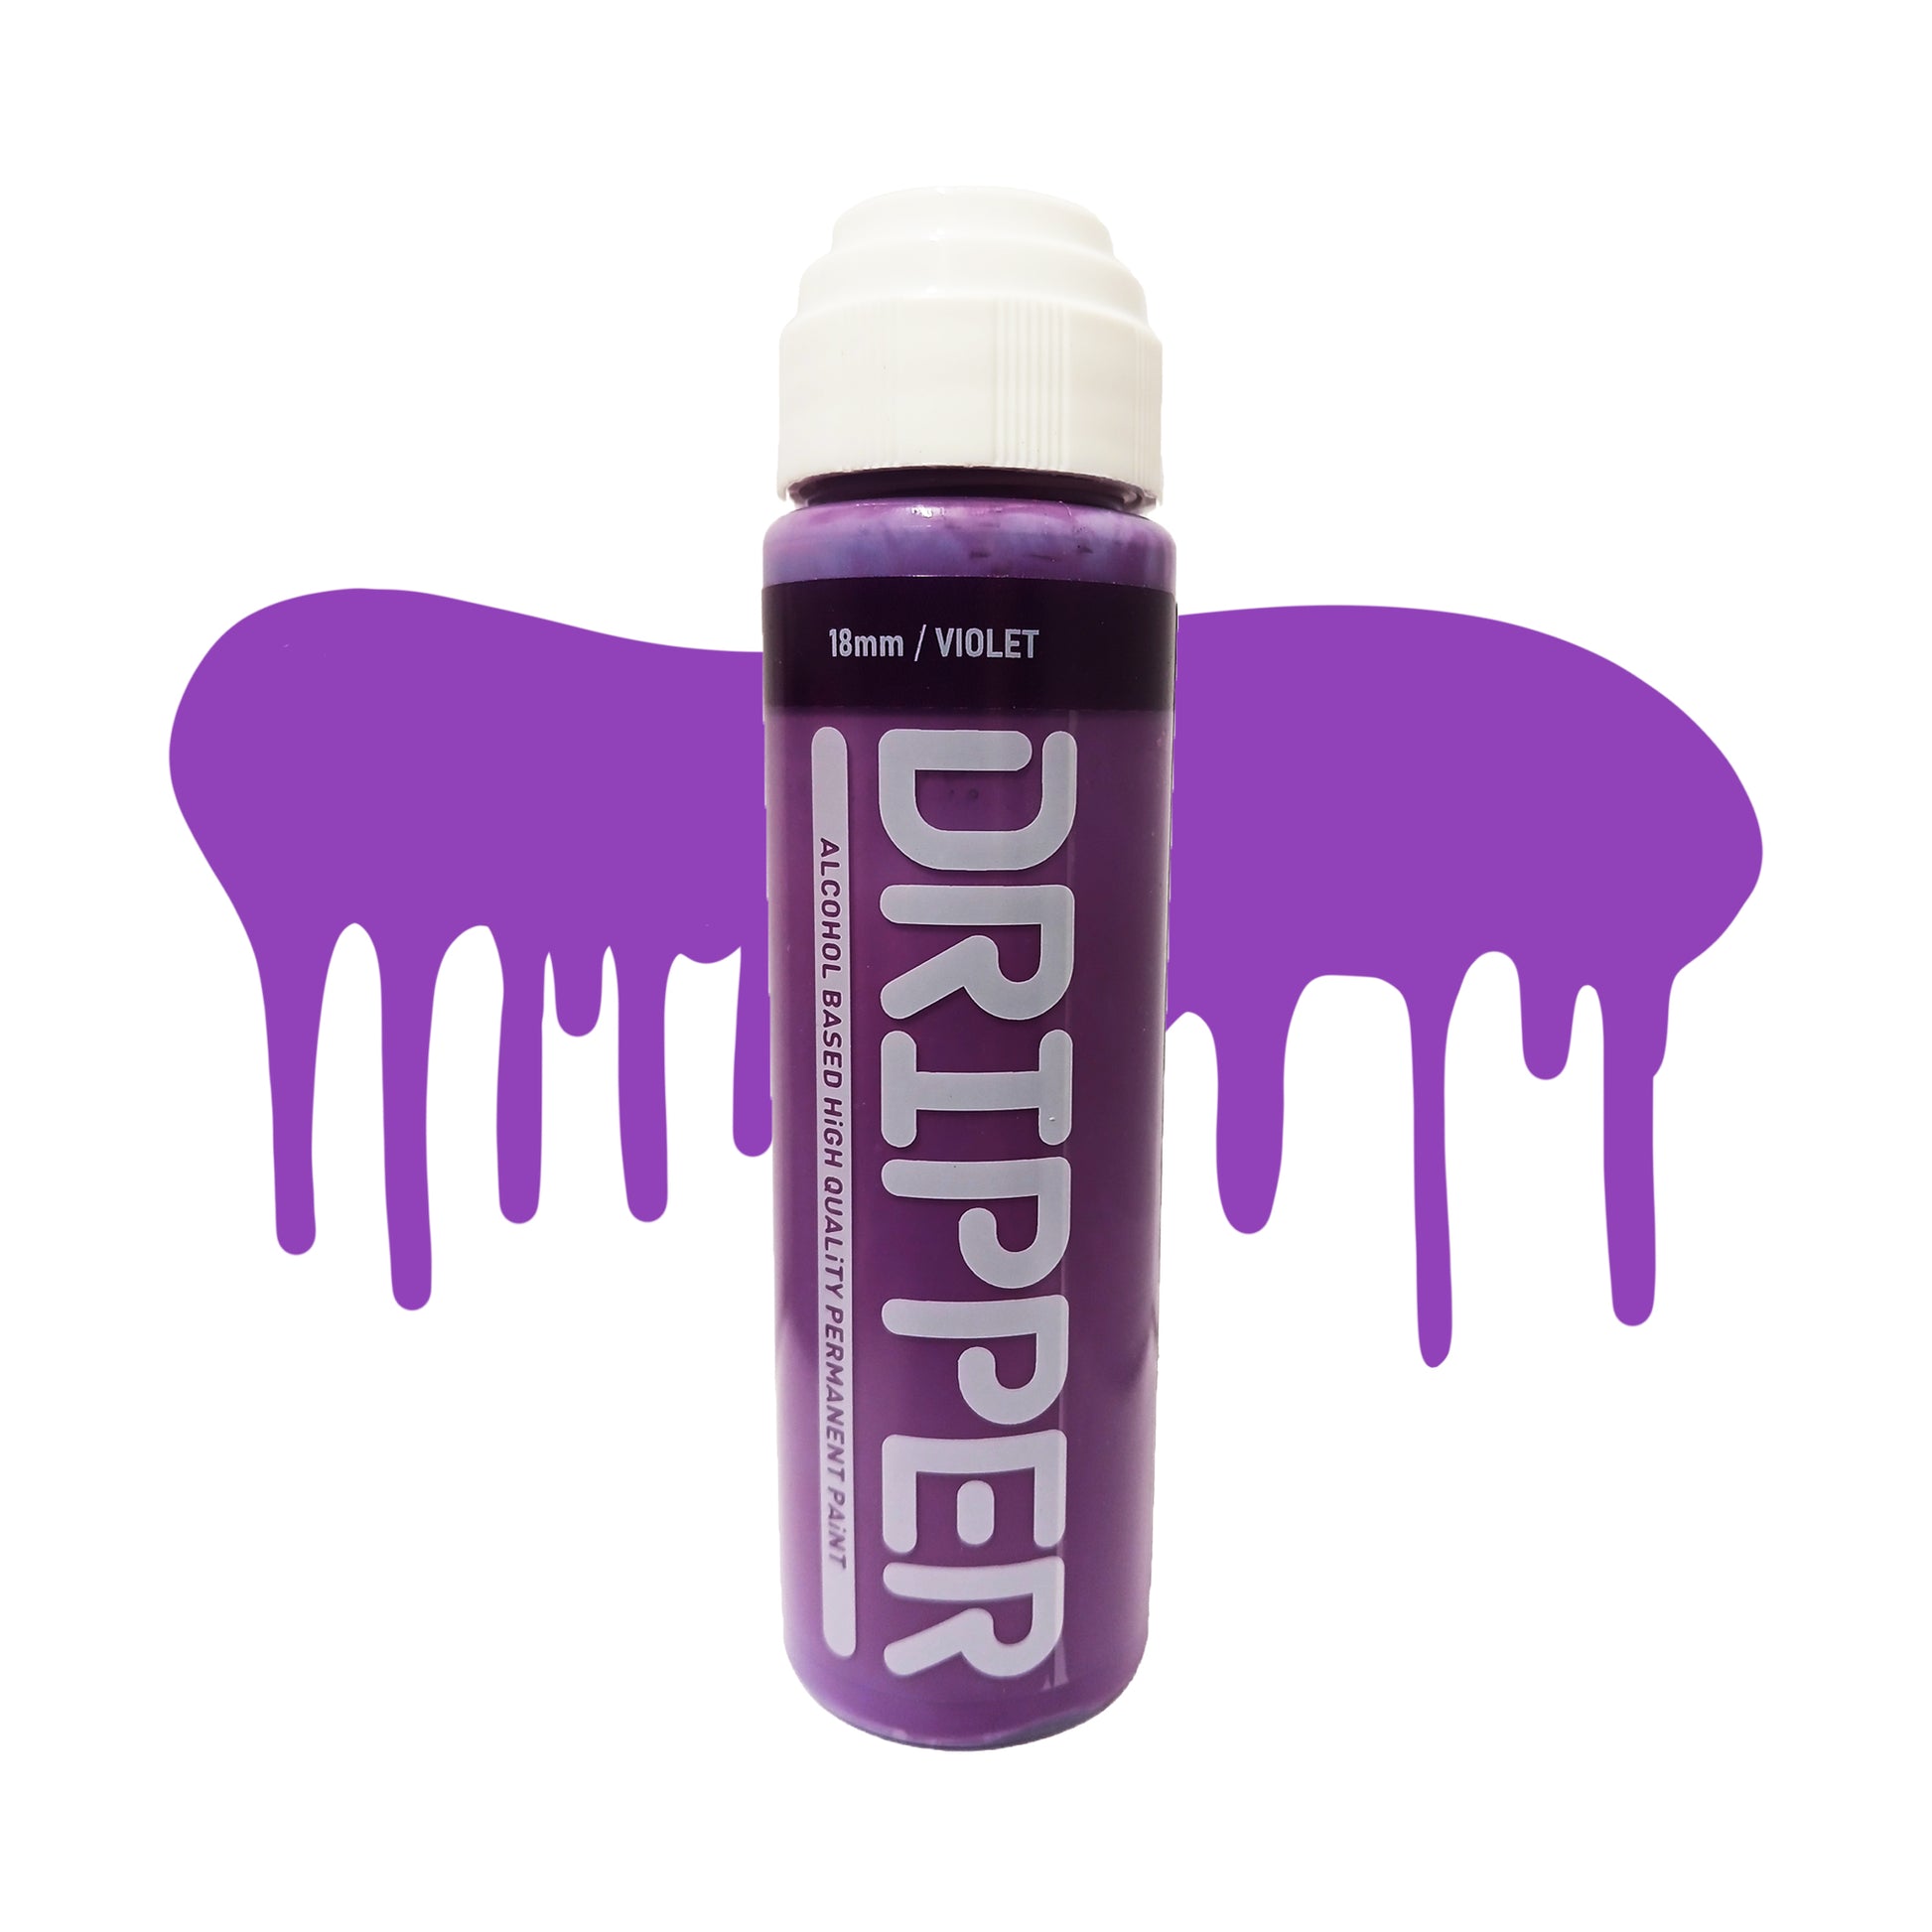 Dope Paint, Graffiti Squeeze Dripper Mop Marker in violet.